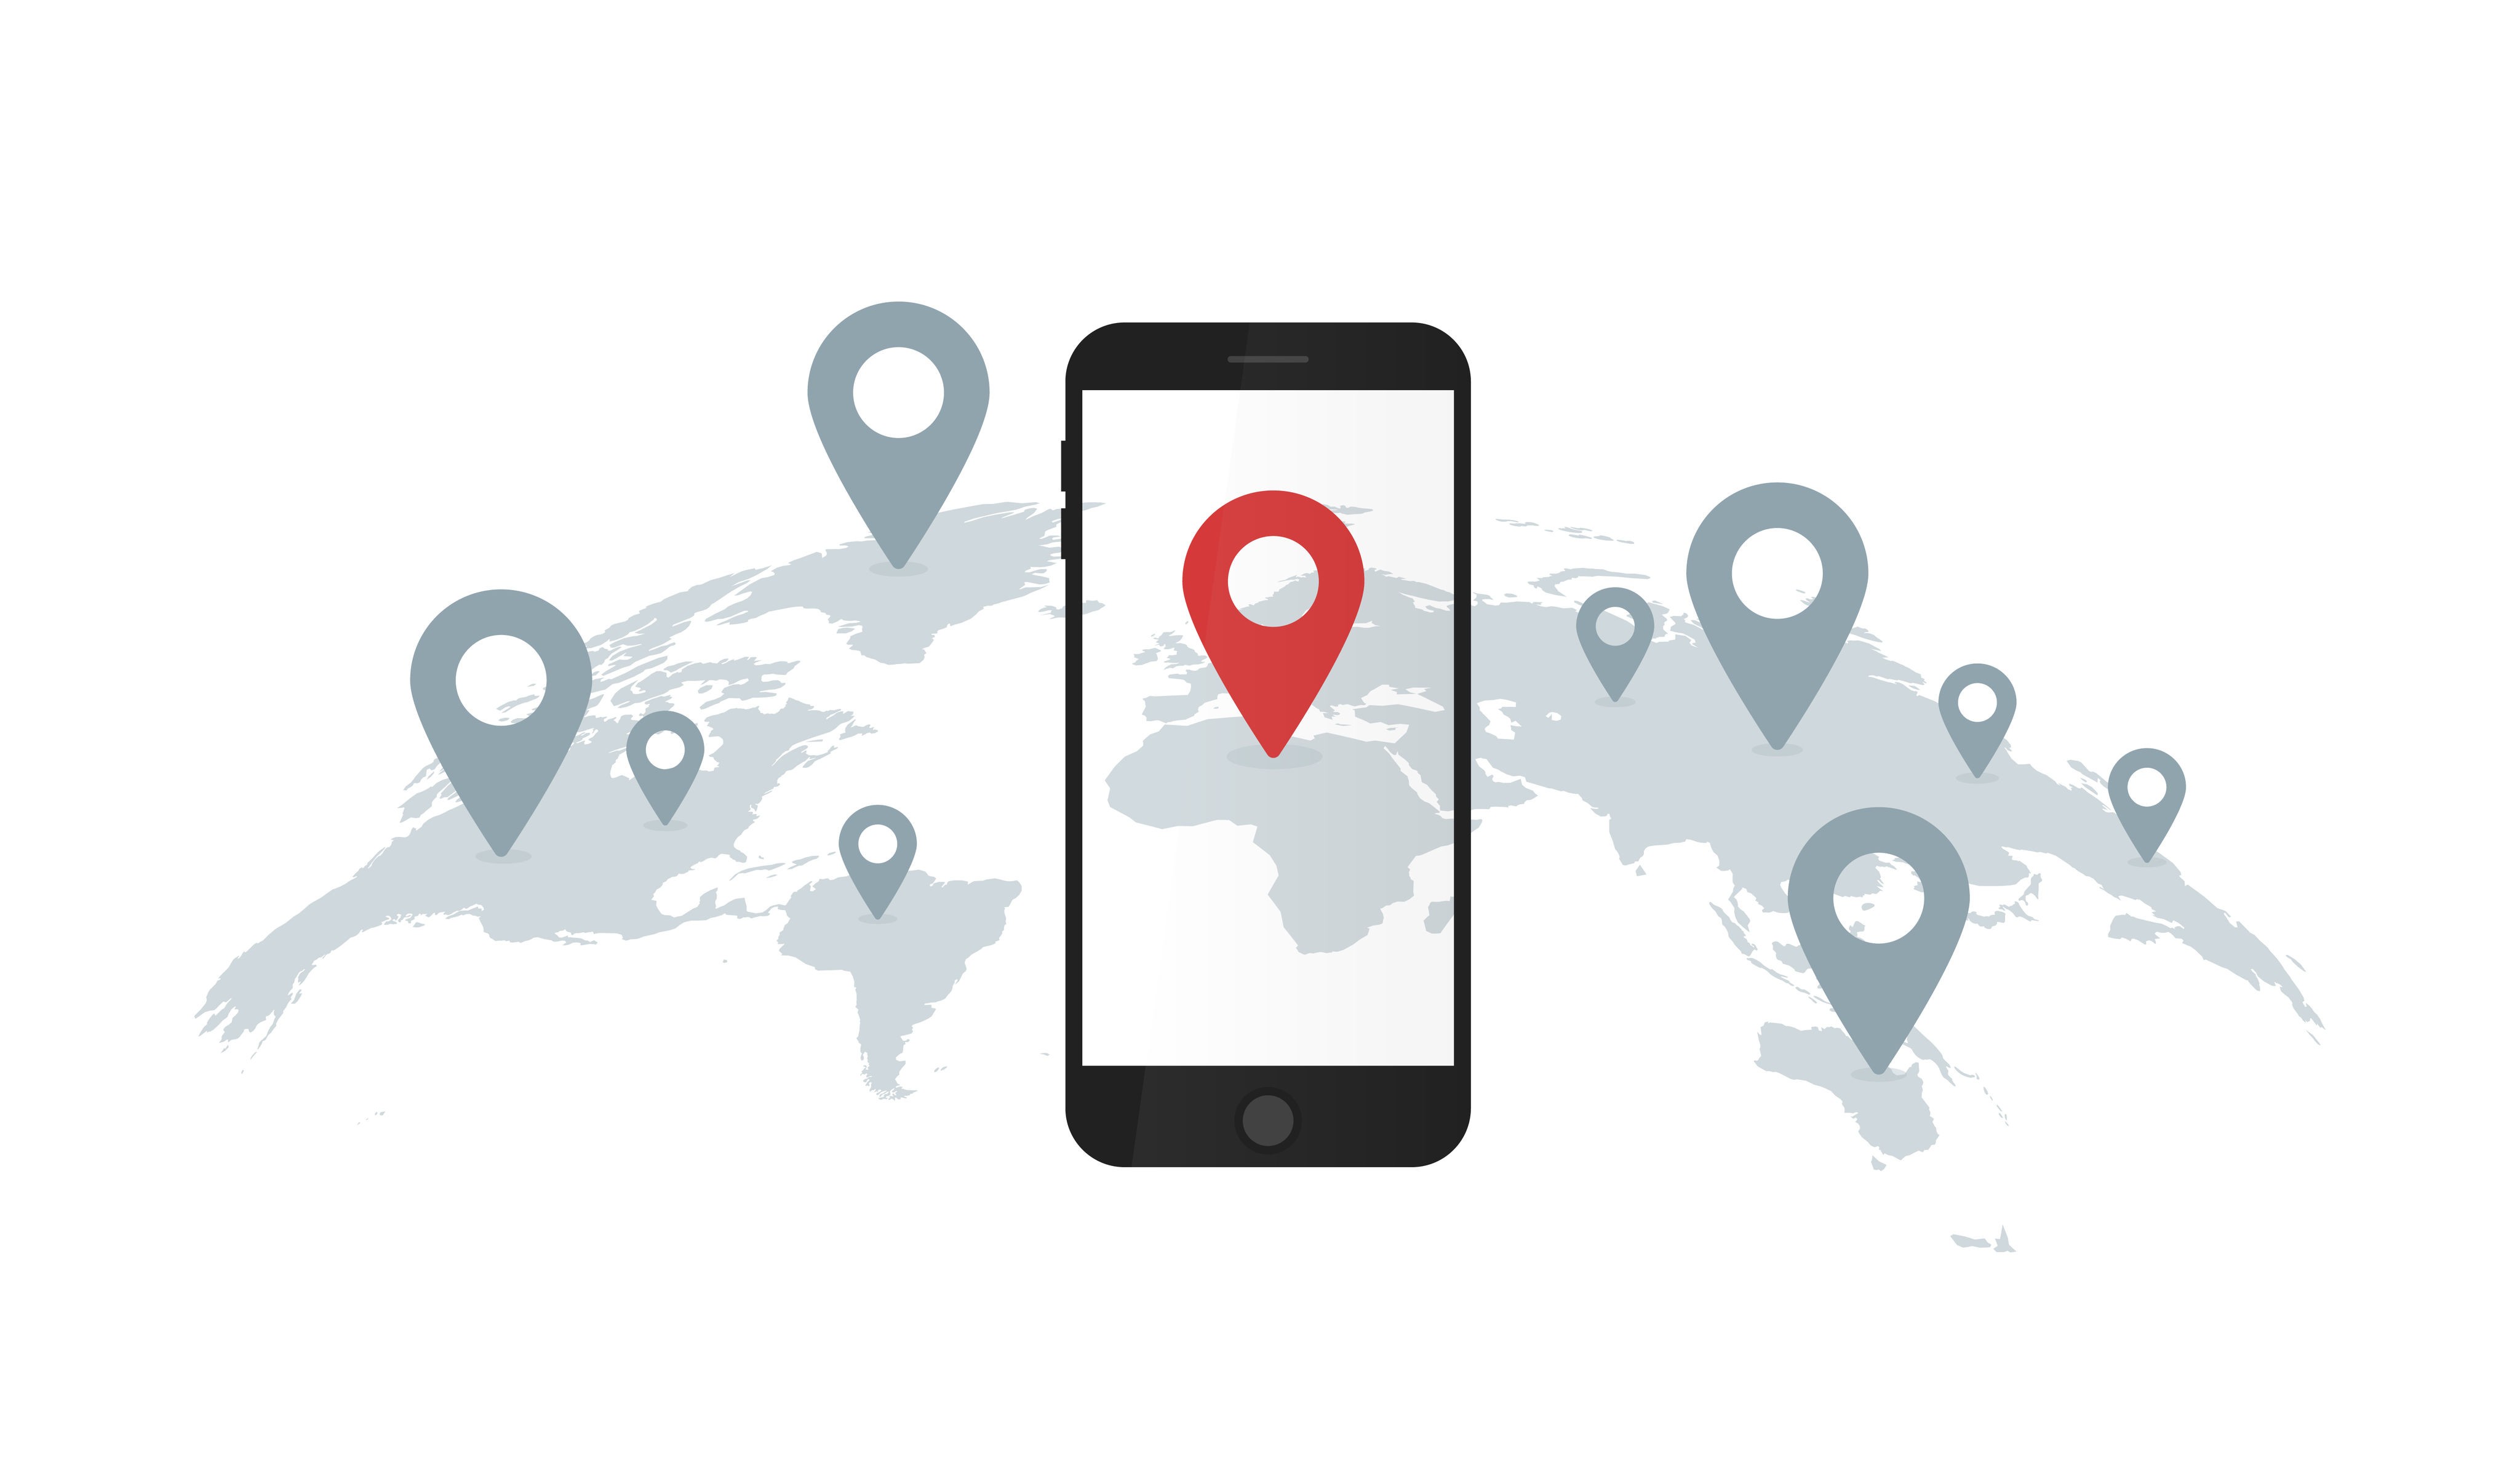 82751668 - vector illustration of world map and smartphone with geolocation pins.